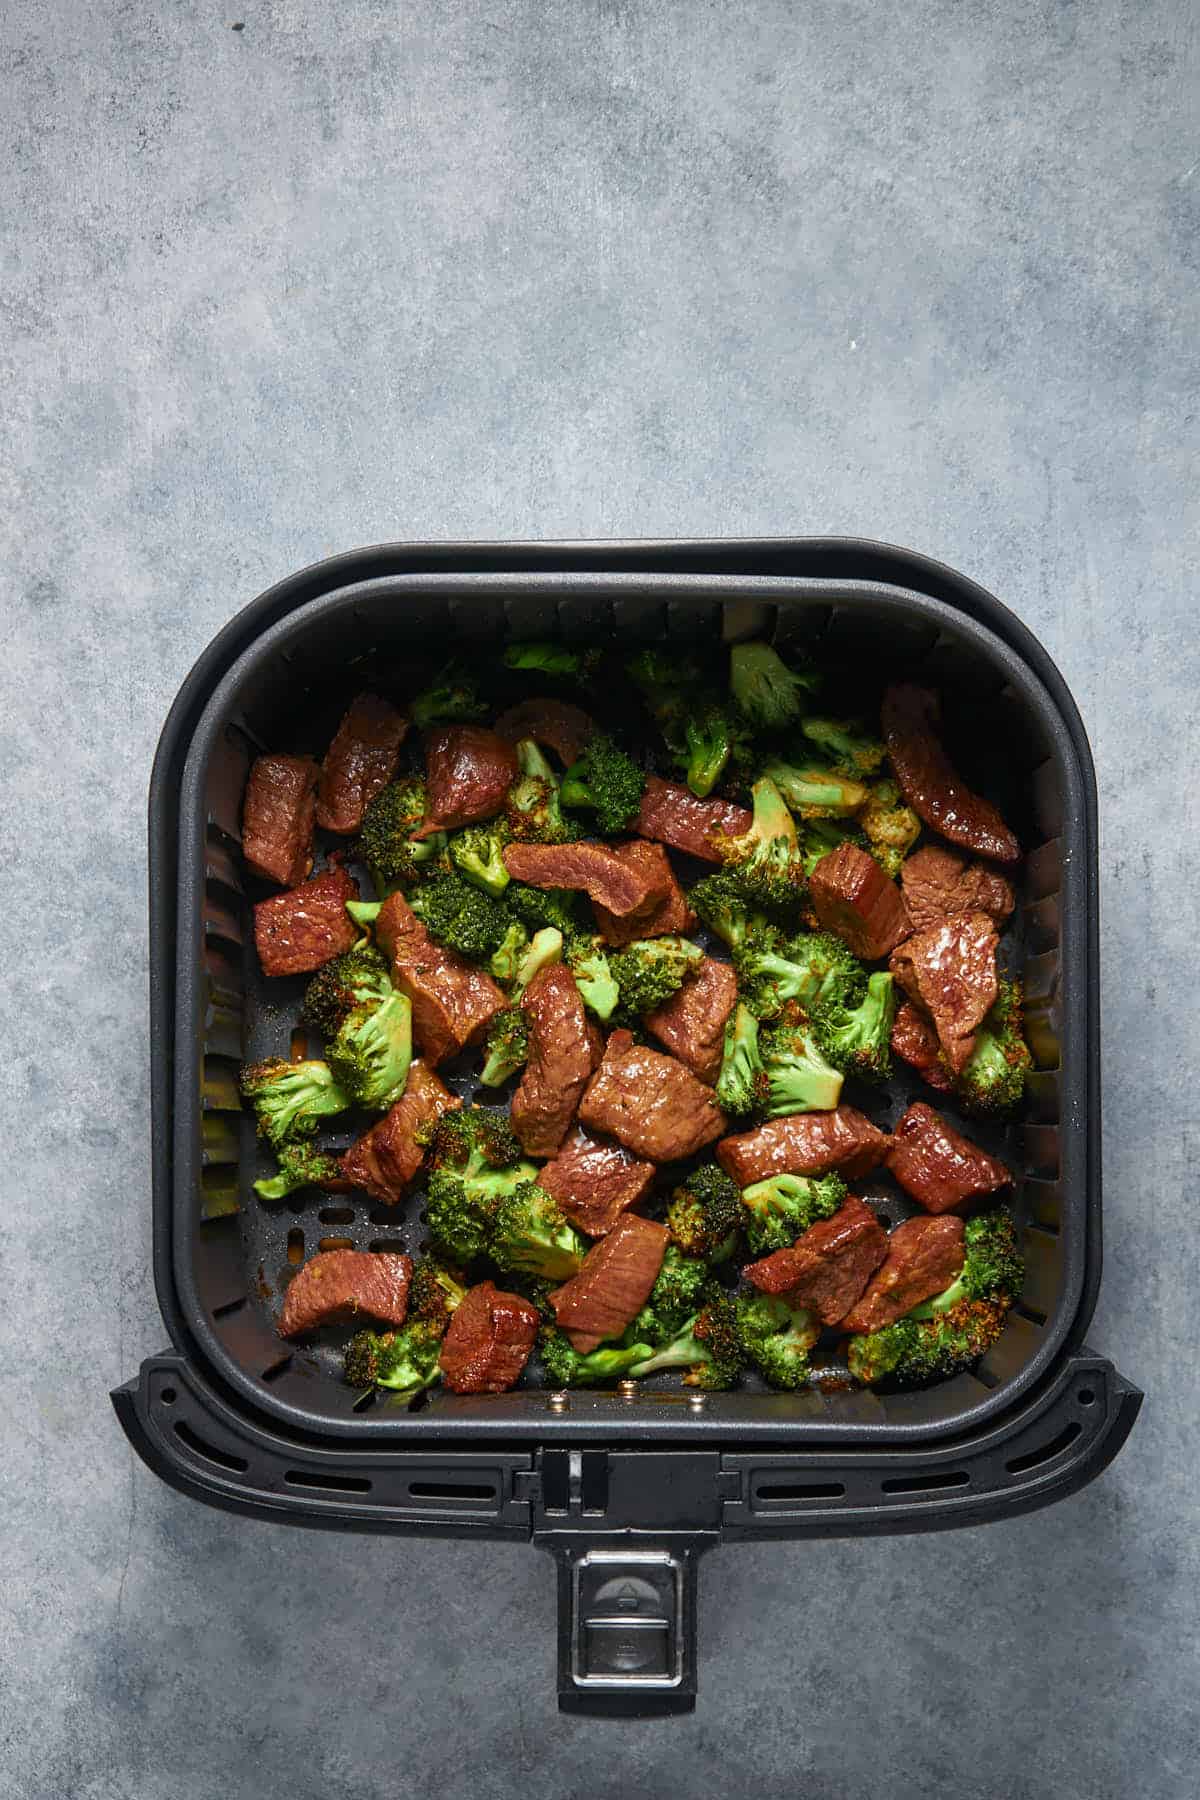 Beef and broccoli in the air fryer basket after cooking.